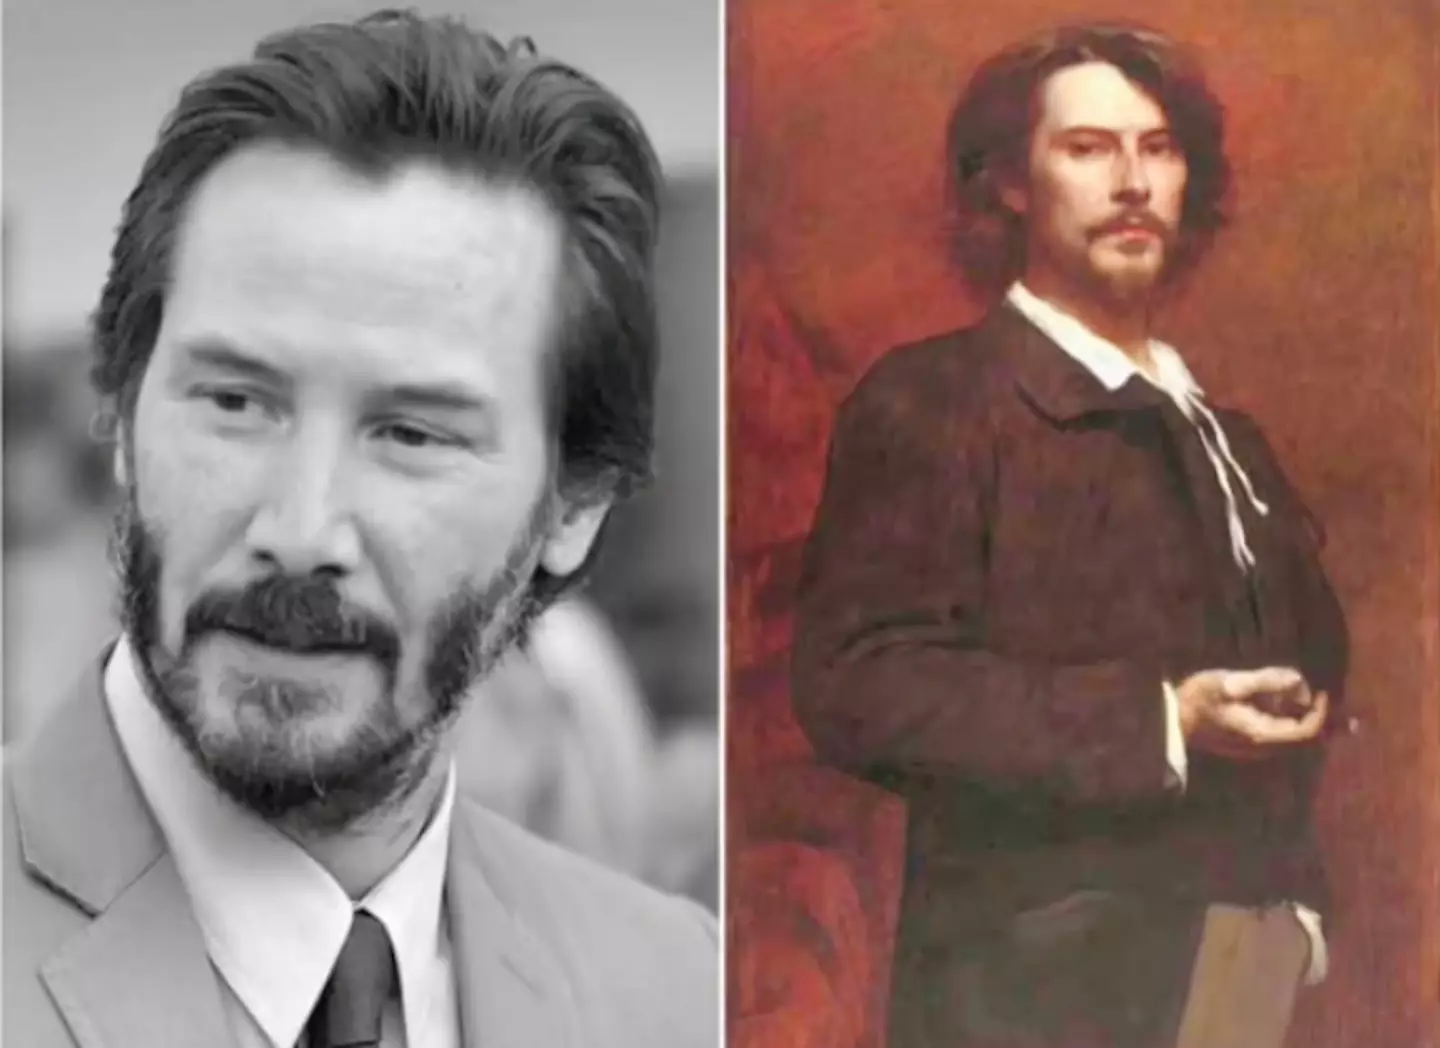 Keanu, is that you?